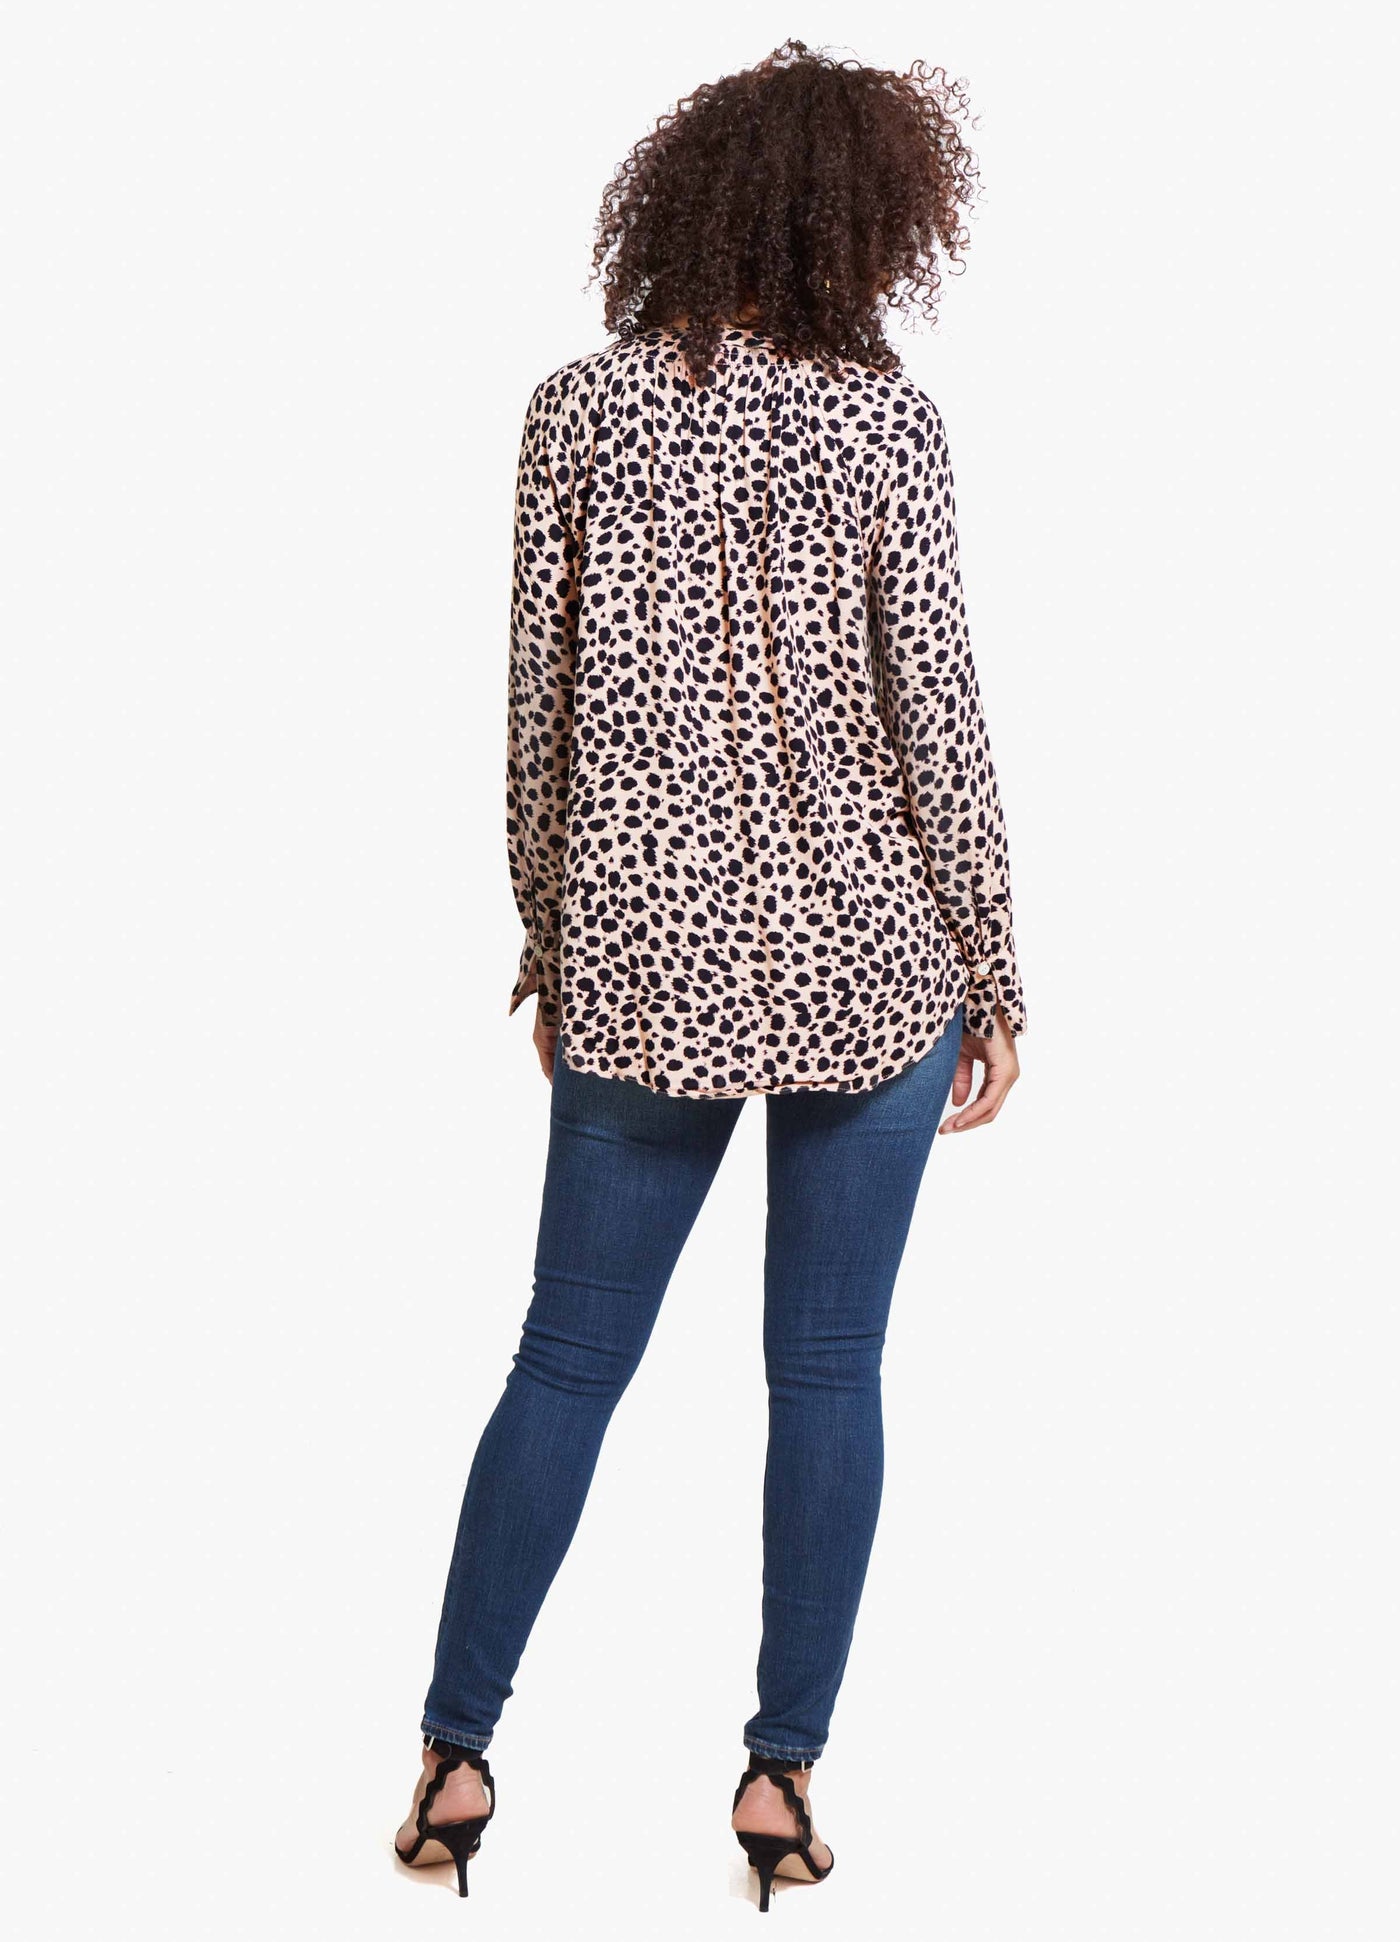 Model is 5’10”, 4 months pregnant, and wearing size small ||Leopard